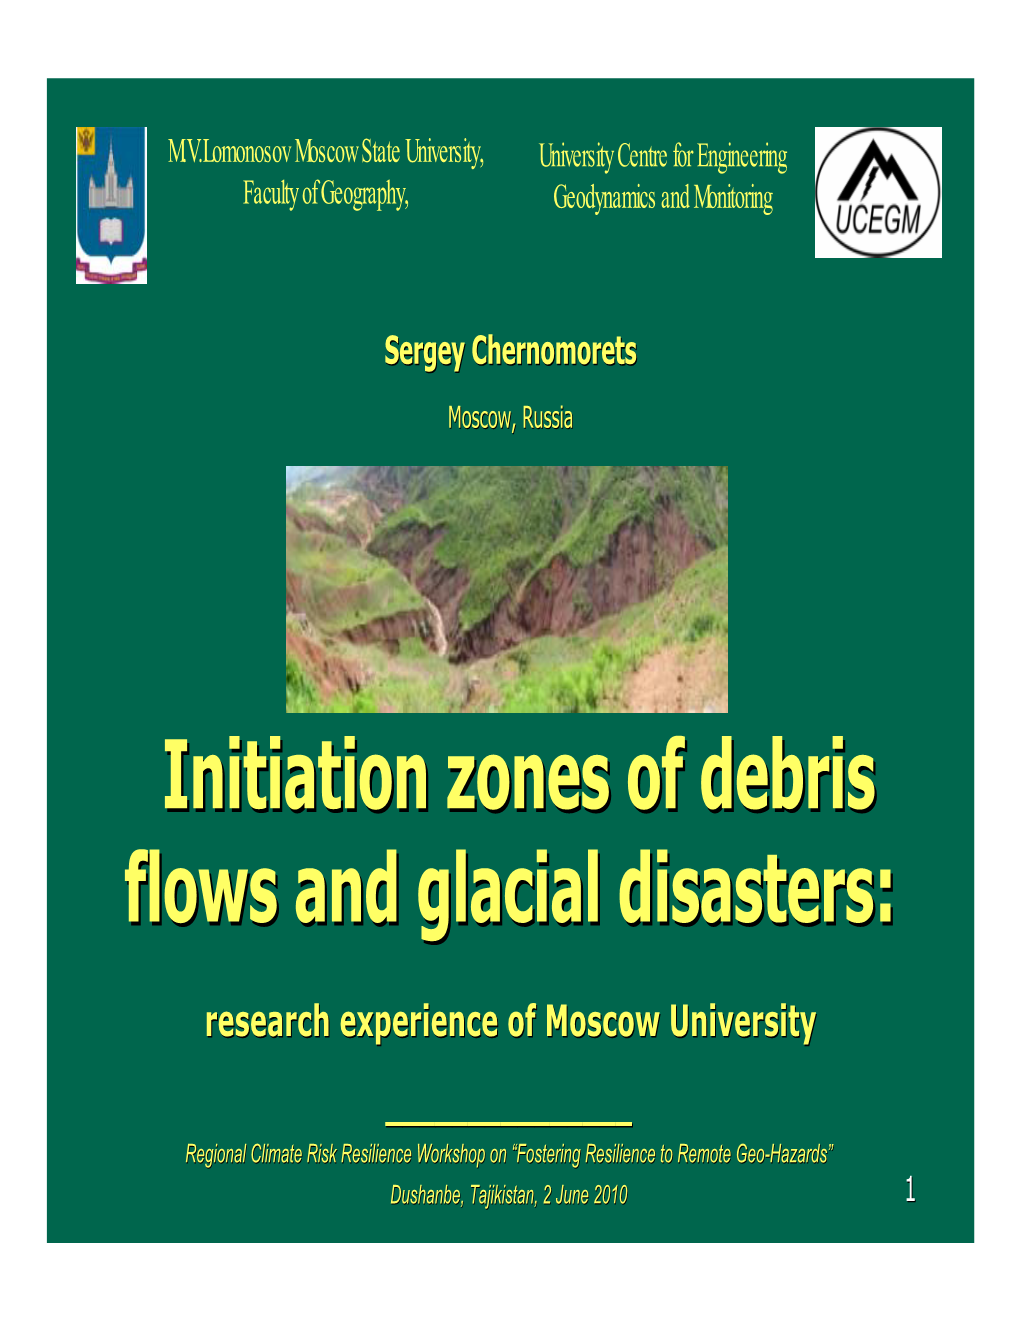 Initiation Zones of Debris Flows and Glacial Disasters